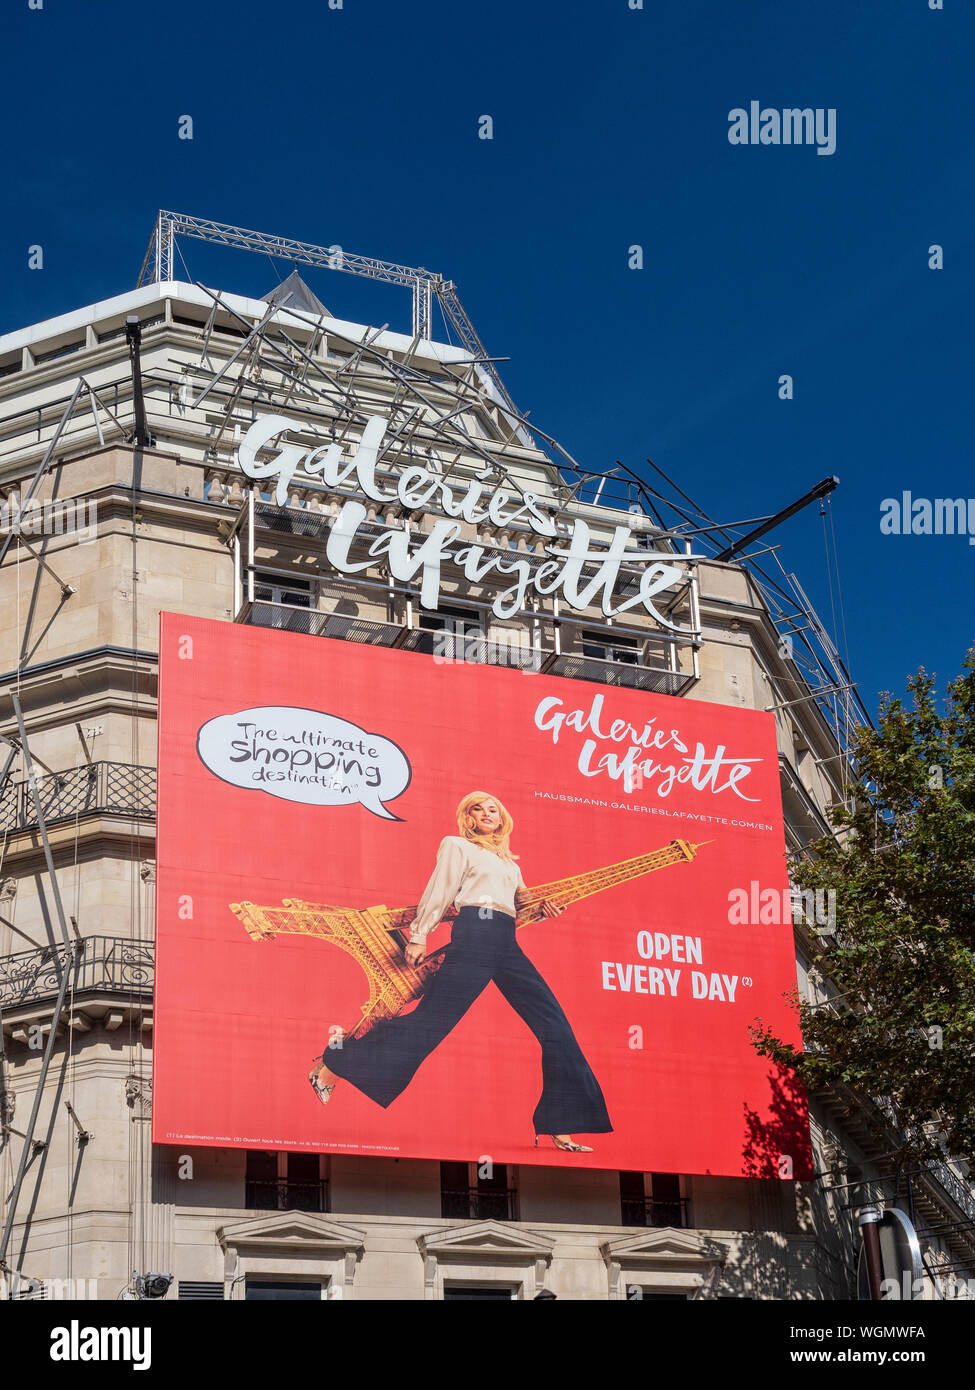 PARIS, FRANCE - AUGUST 04, 2018:   Exterior view Galeries Lafayette department store on Boulevard Haussmann with sign Stock Photo